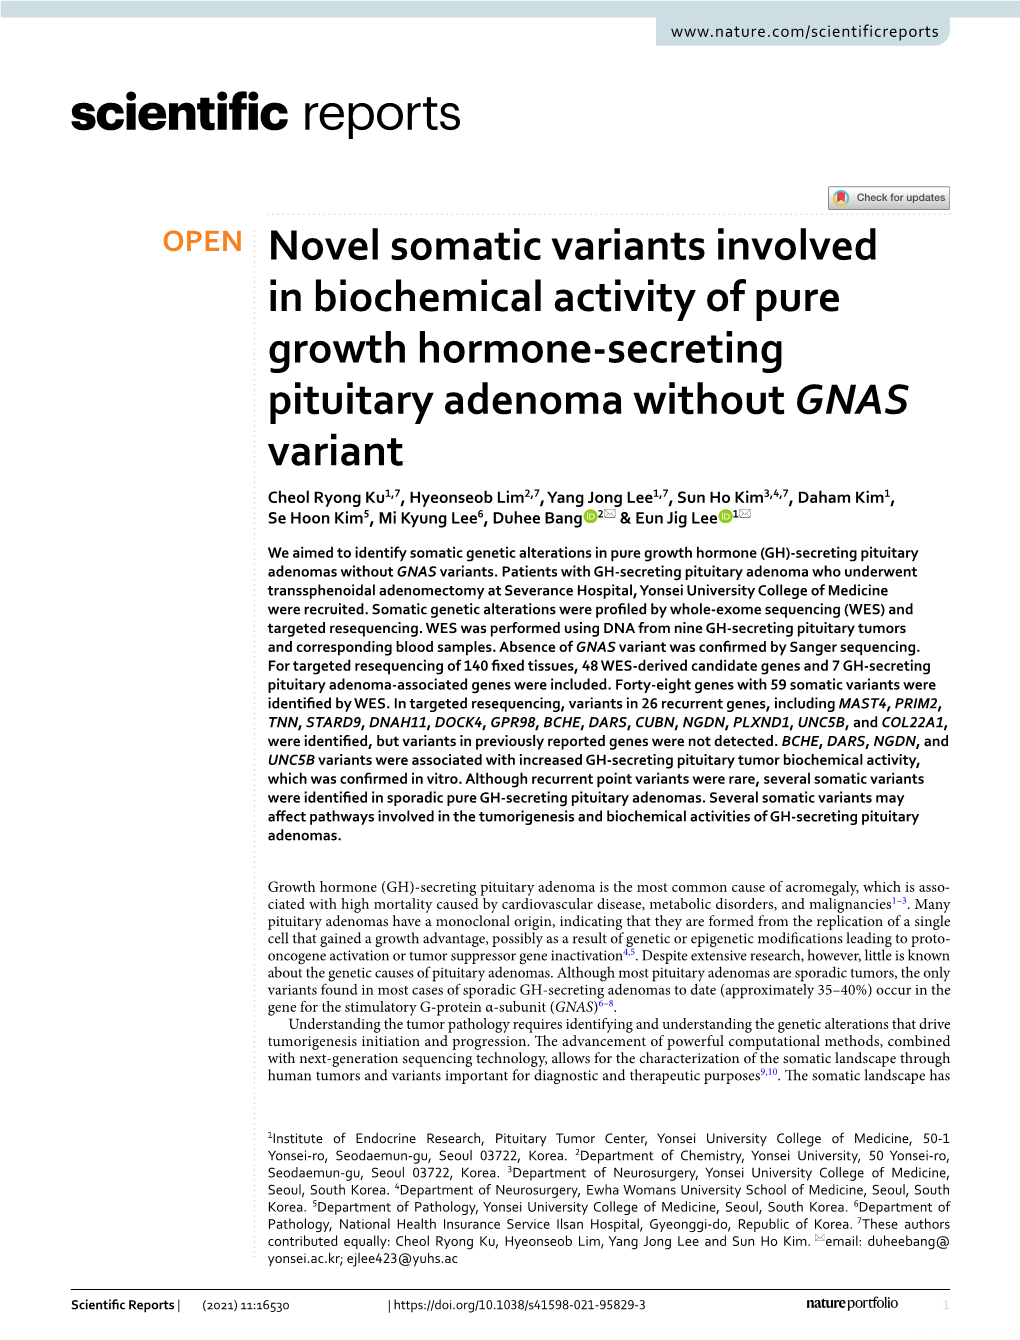 Novel Somatic Variants Involved in Biochemical Activity of Pure Growth